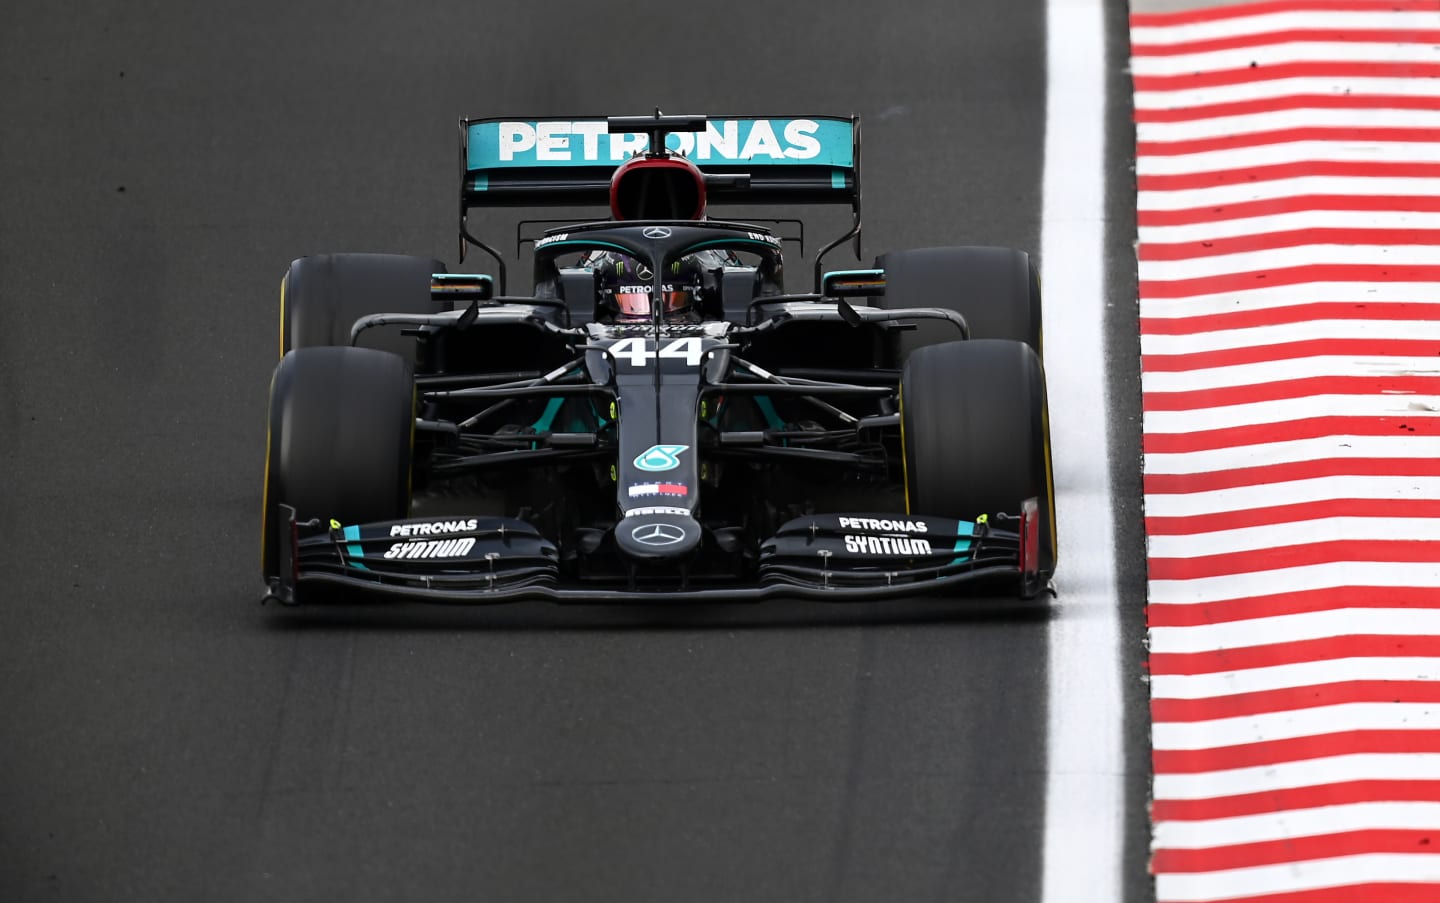 BUDAPEST, HUNGARY - JULY 19: Lewis Hamilton of Great Britain driving the (44) Mercedes AMG Petronas